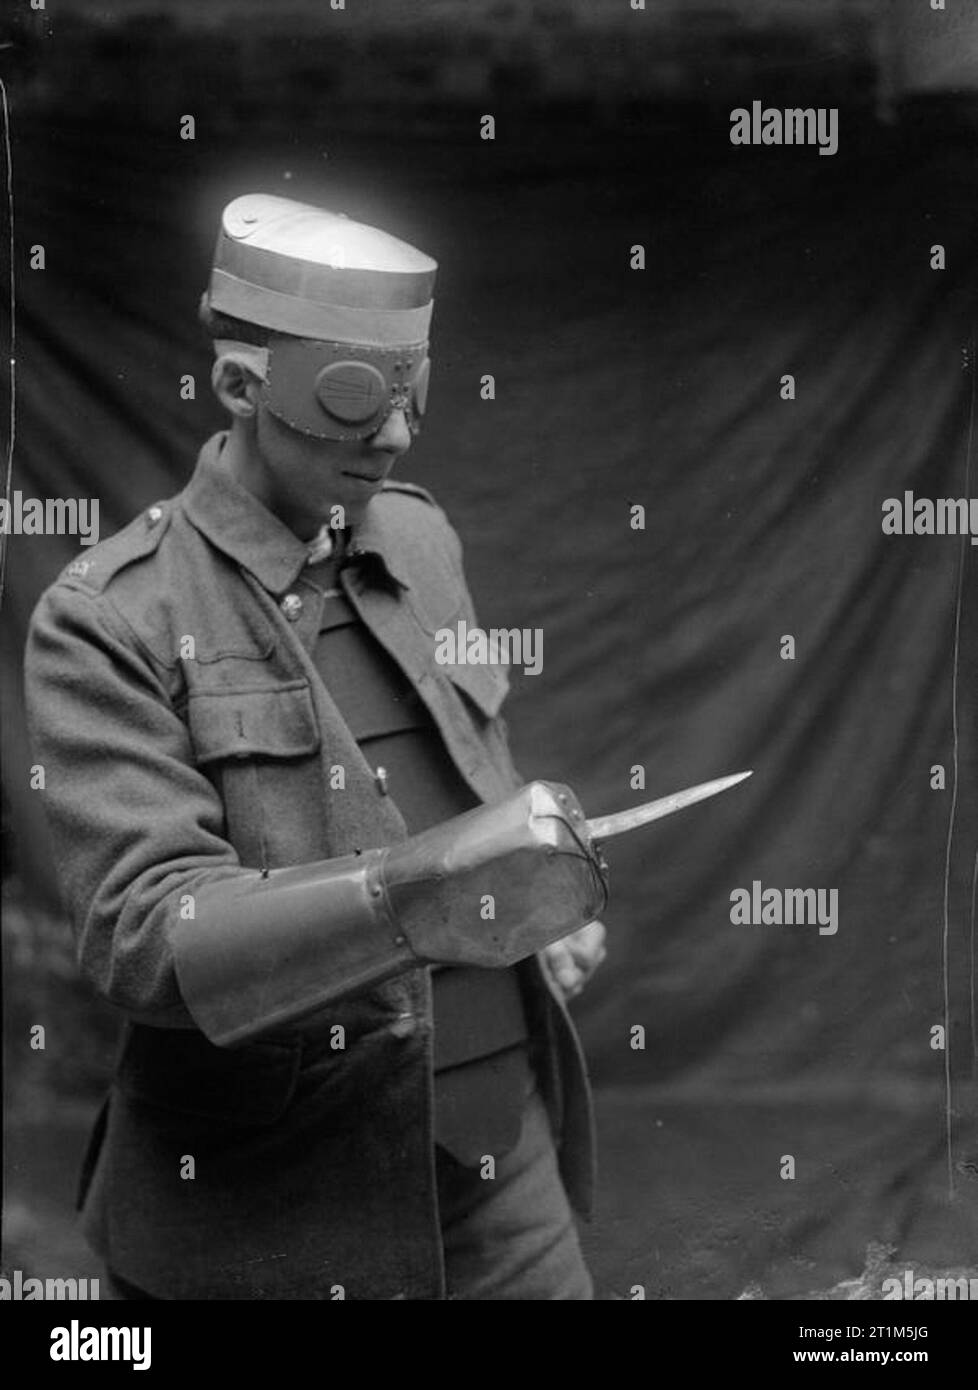 Ministry of Information First World War Official Collection Steel cap for wearing under ordinance cap, French splinter gogggles (vision is obtained through thin slits in goggles). And steel dagger gauntlet. Stock Photo